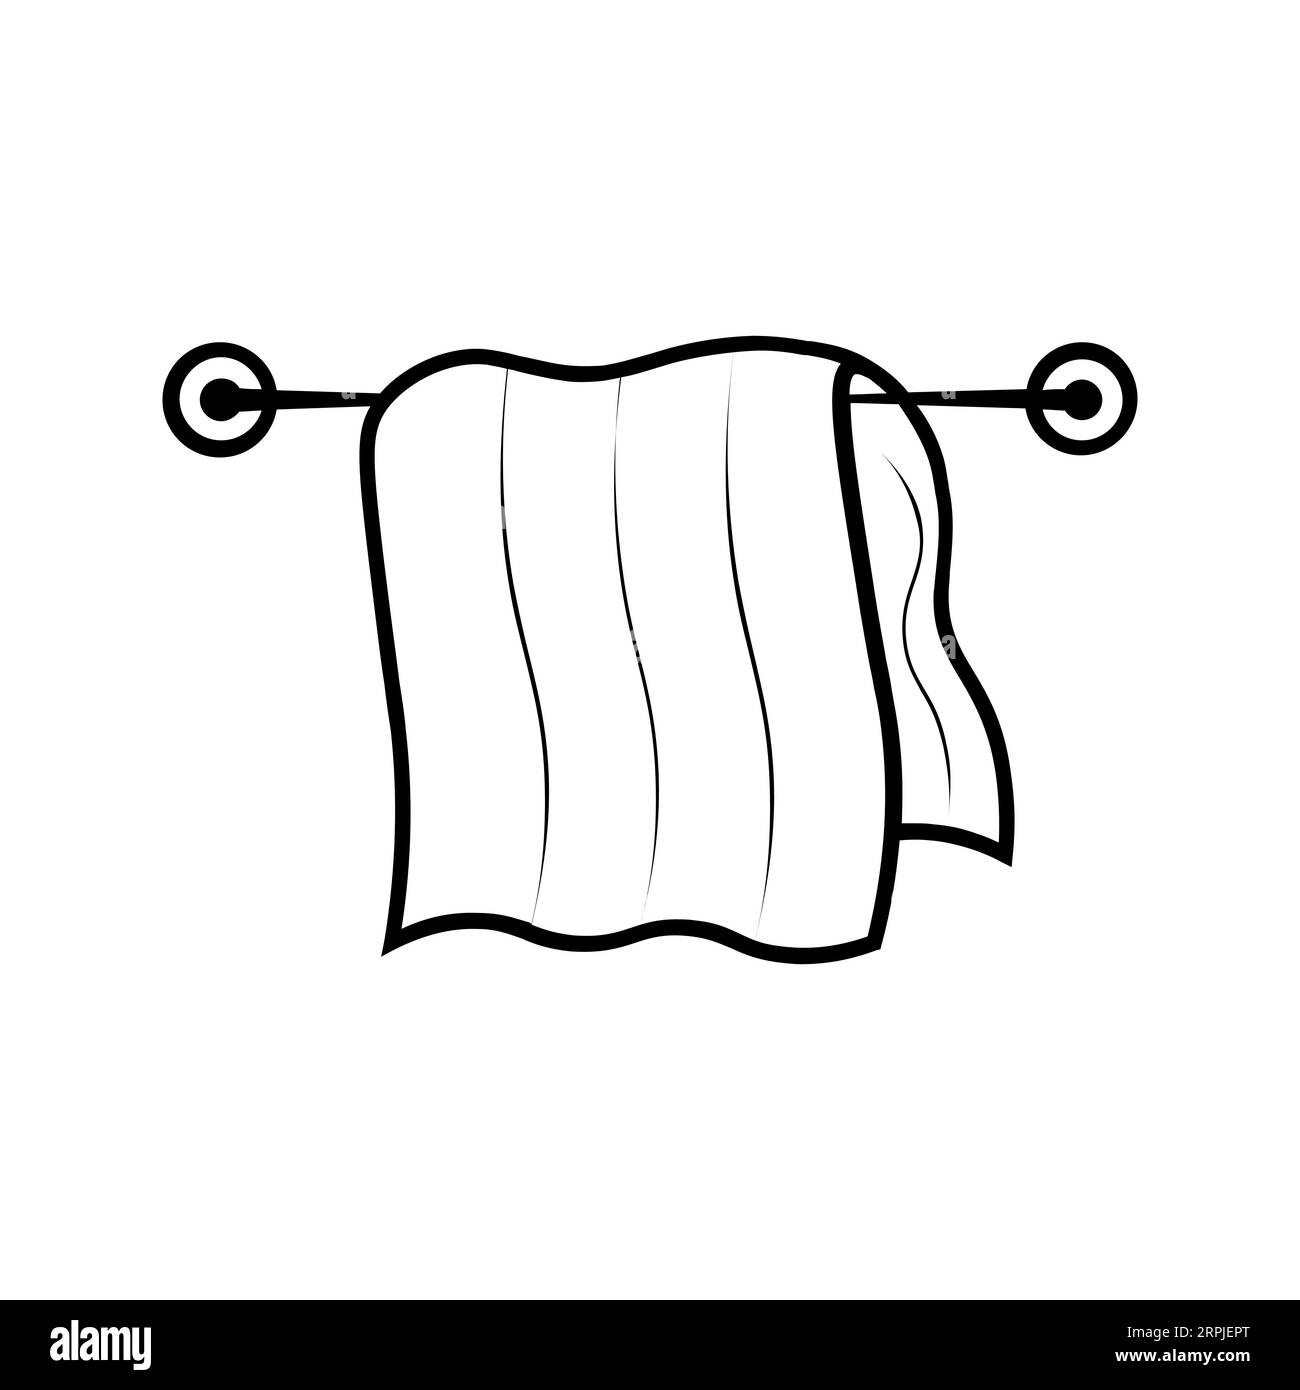 TOWEL Editable and Resizeable Vector Icon Stock Vector